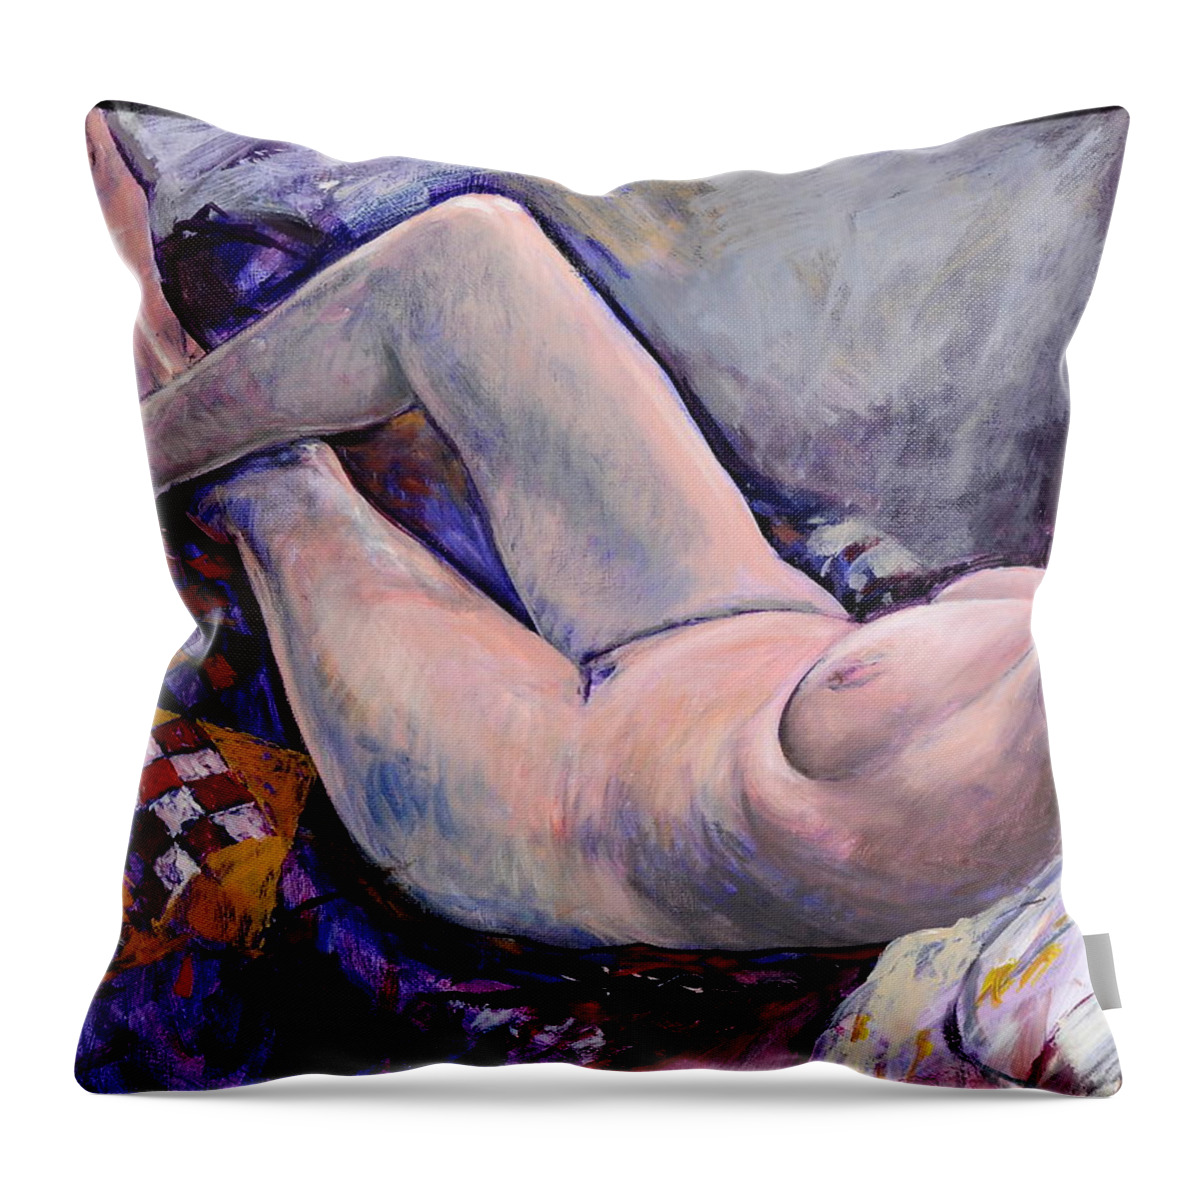 Life Throw Pillow featuring the painting Life Painting with Quilt by Harry Robertson